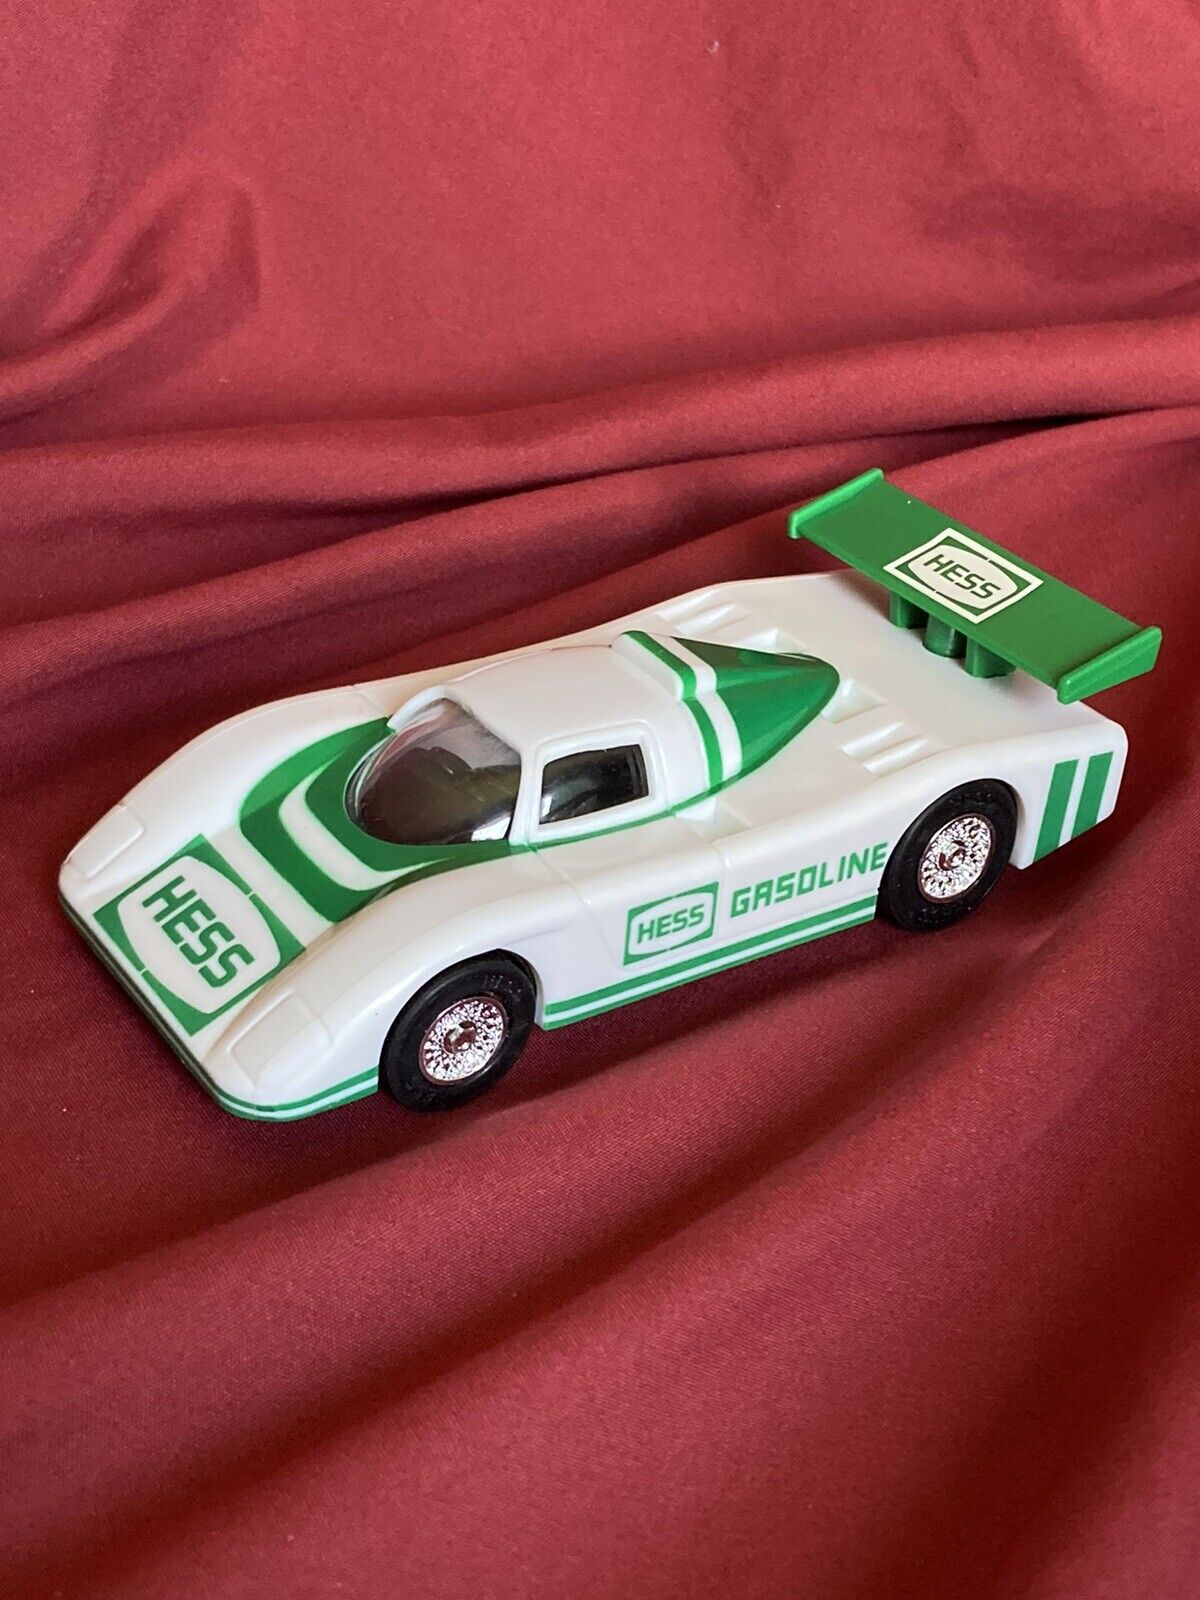 Vintage 1988 Hess Gasoline Toy Race Car Friction Powered Racer-New In Box